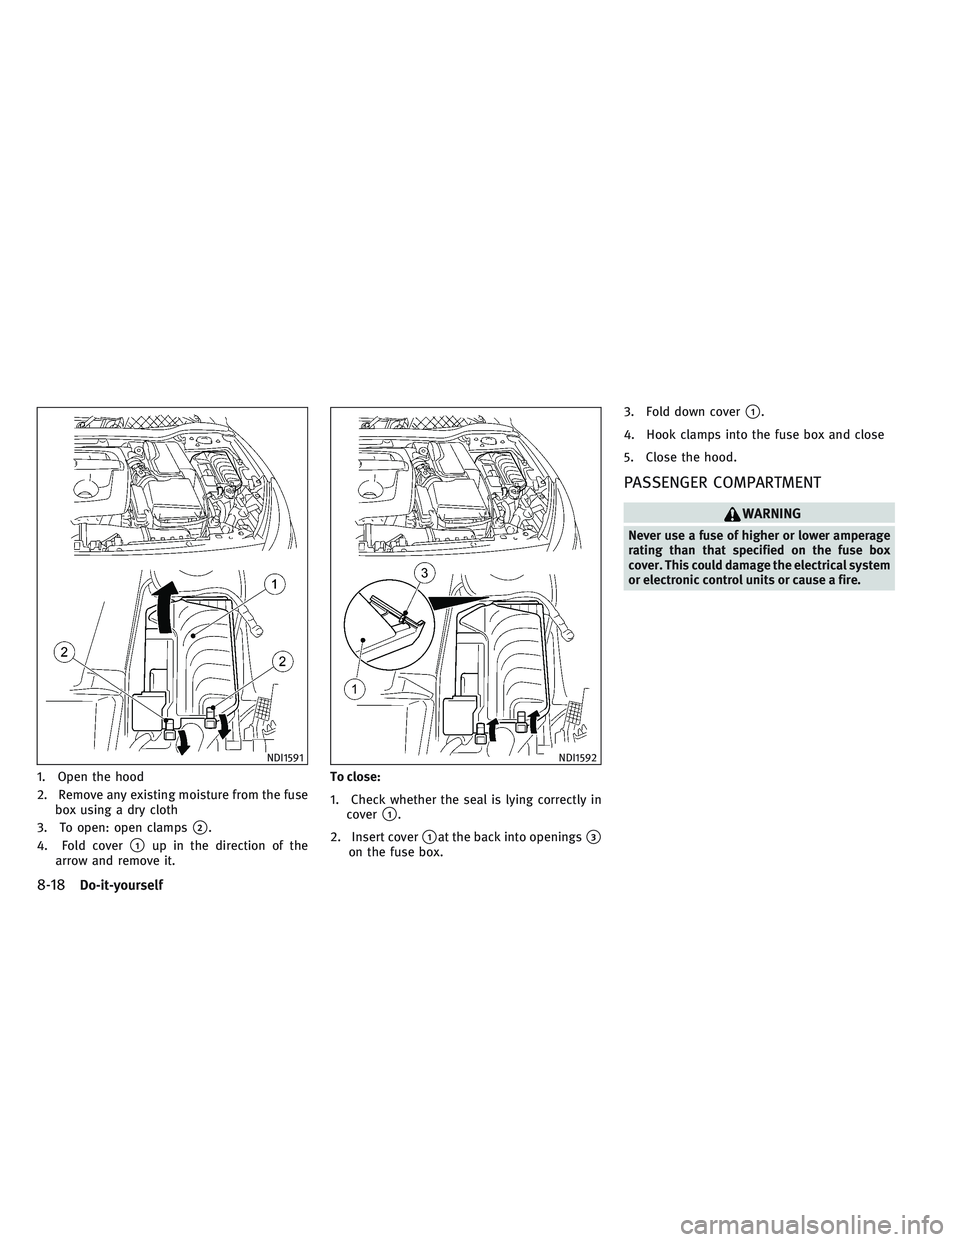 INFINITI QX30 2017  Owners Manual 1. Open the hood
2. Remove any existing moisture from the fuse
box using a dry cloth
3. To open: open clamps
2.
4. Fold cover
1up in the direction of the
arrow and remove it.To close:
1. Check wheth